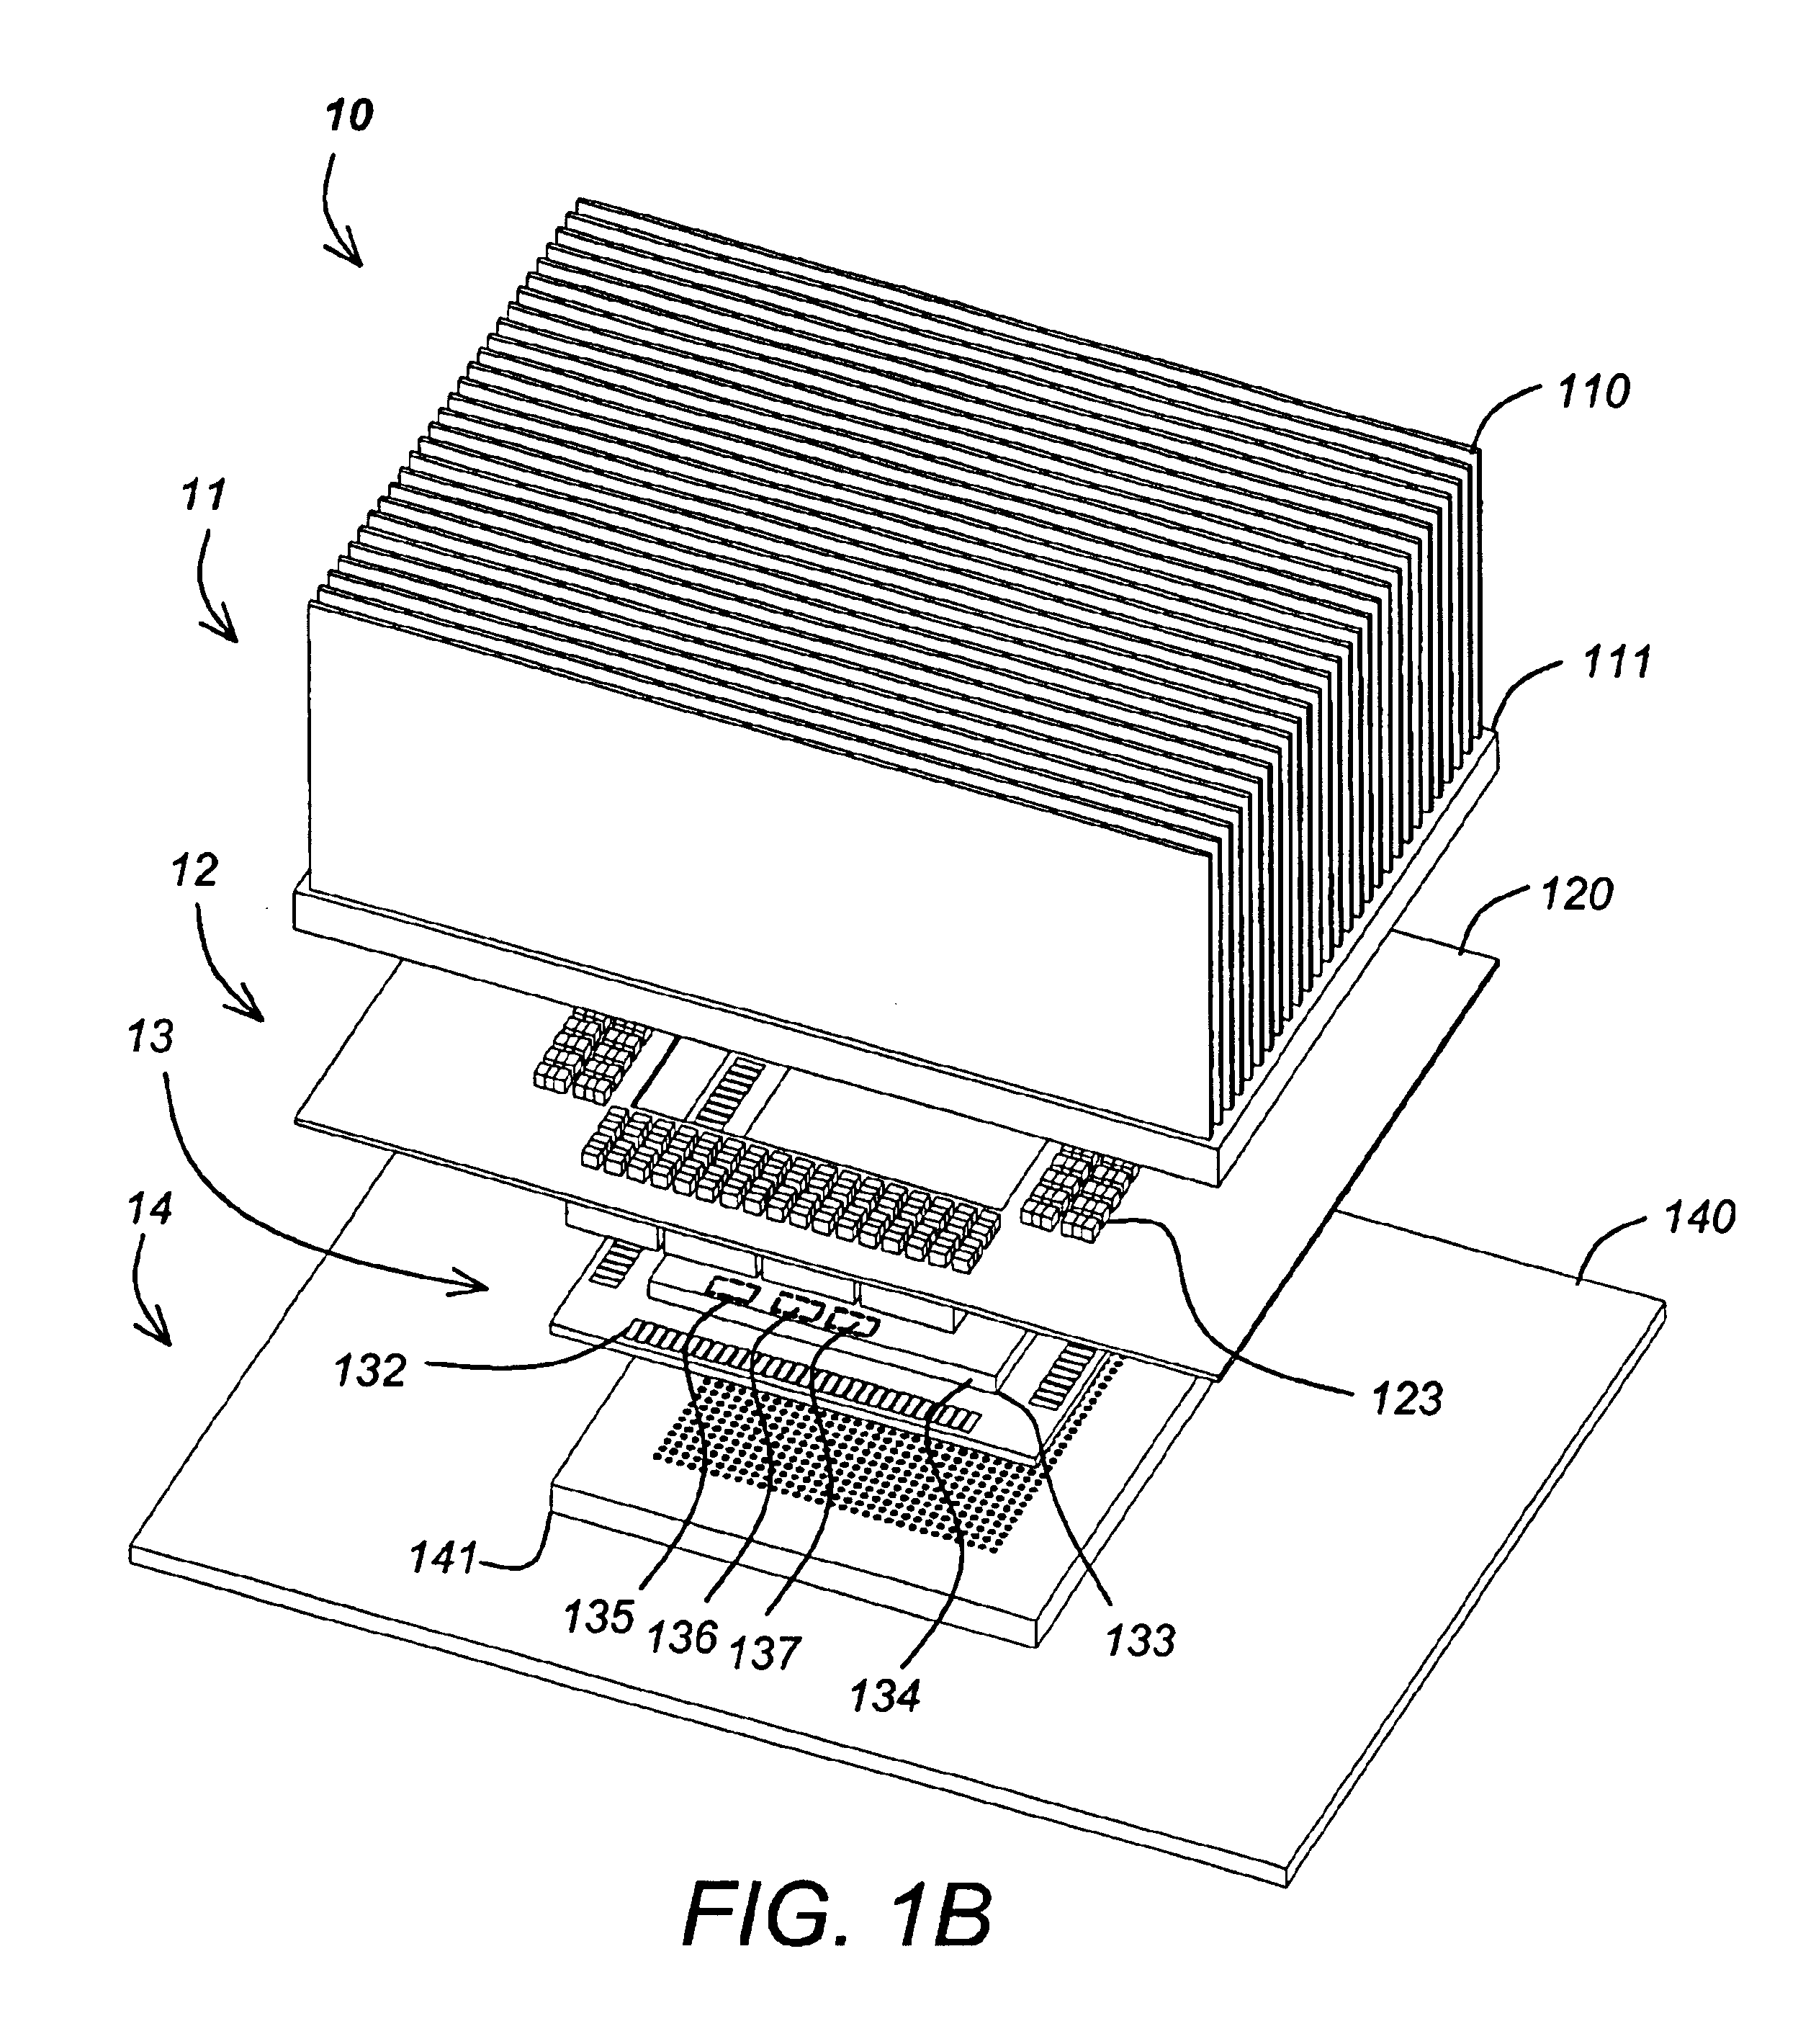 Ultra-low impedance power interconnection system for electronic packages